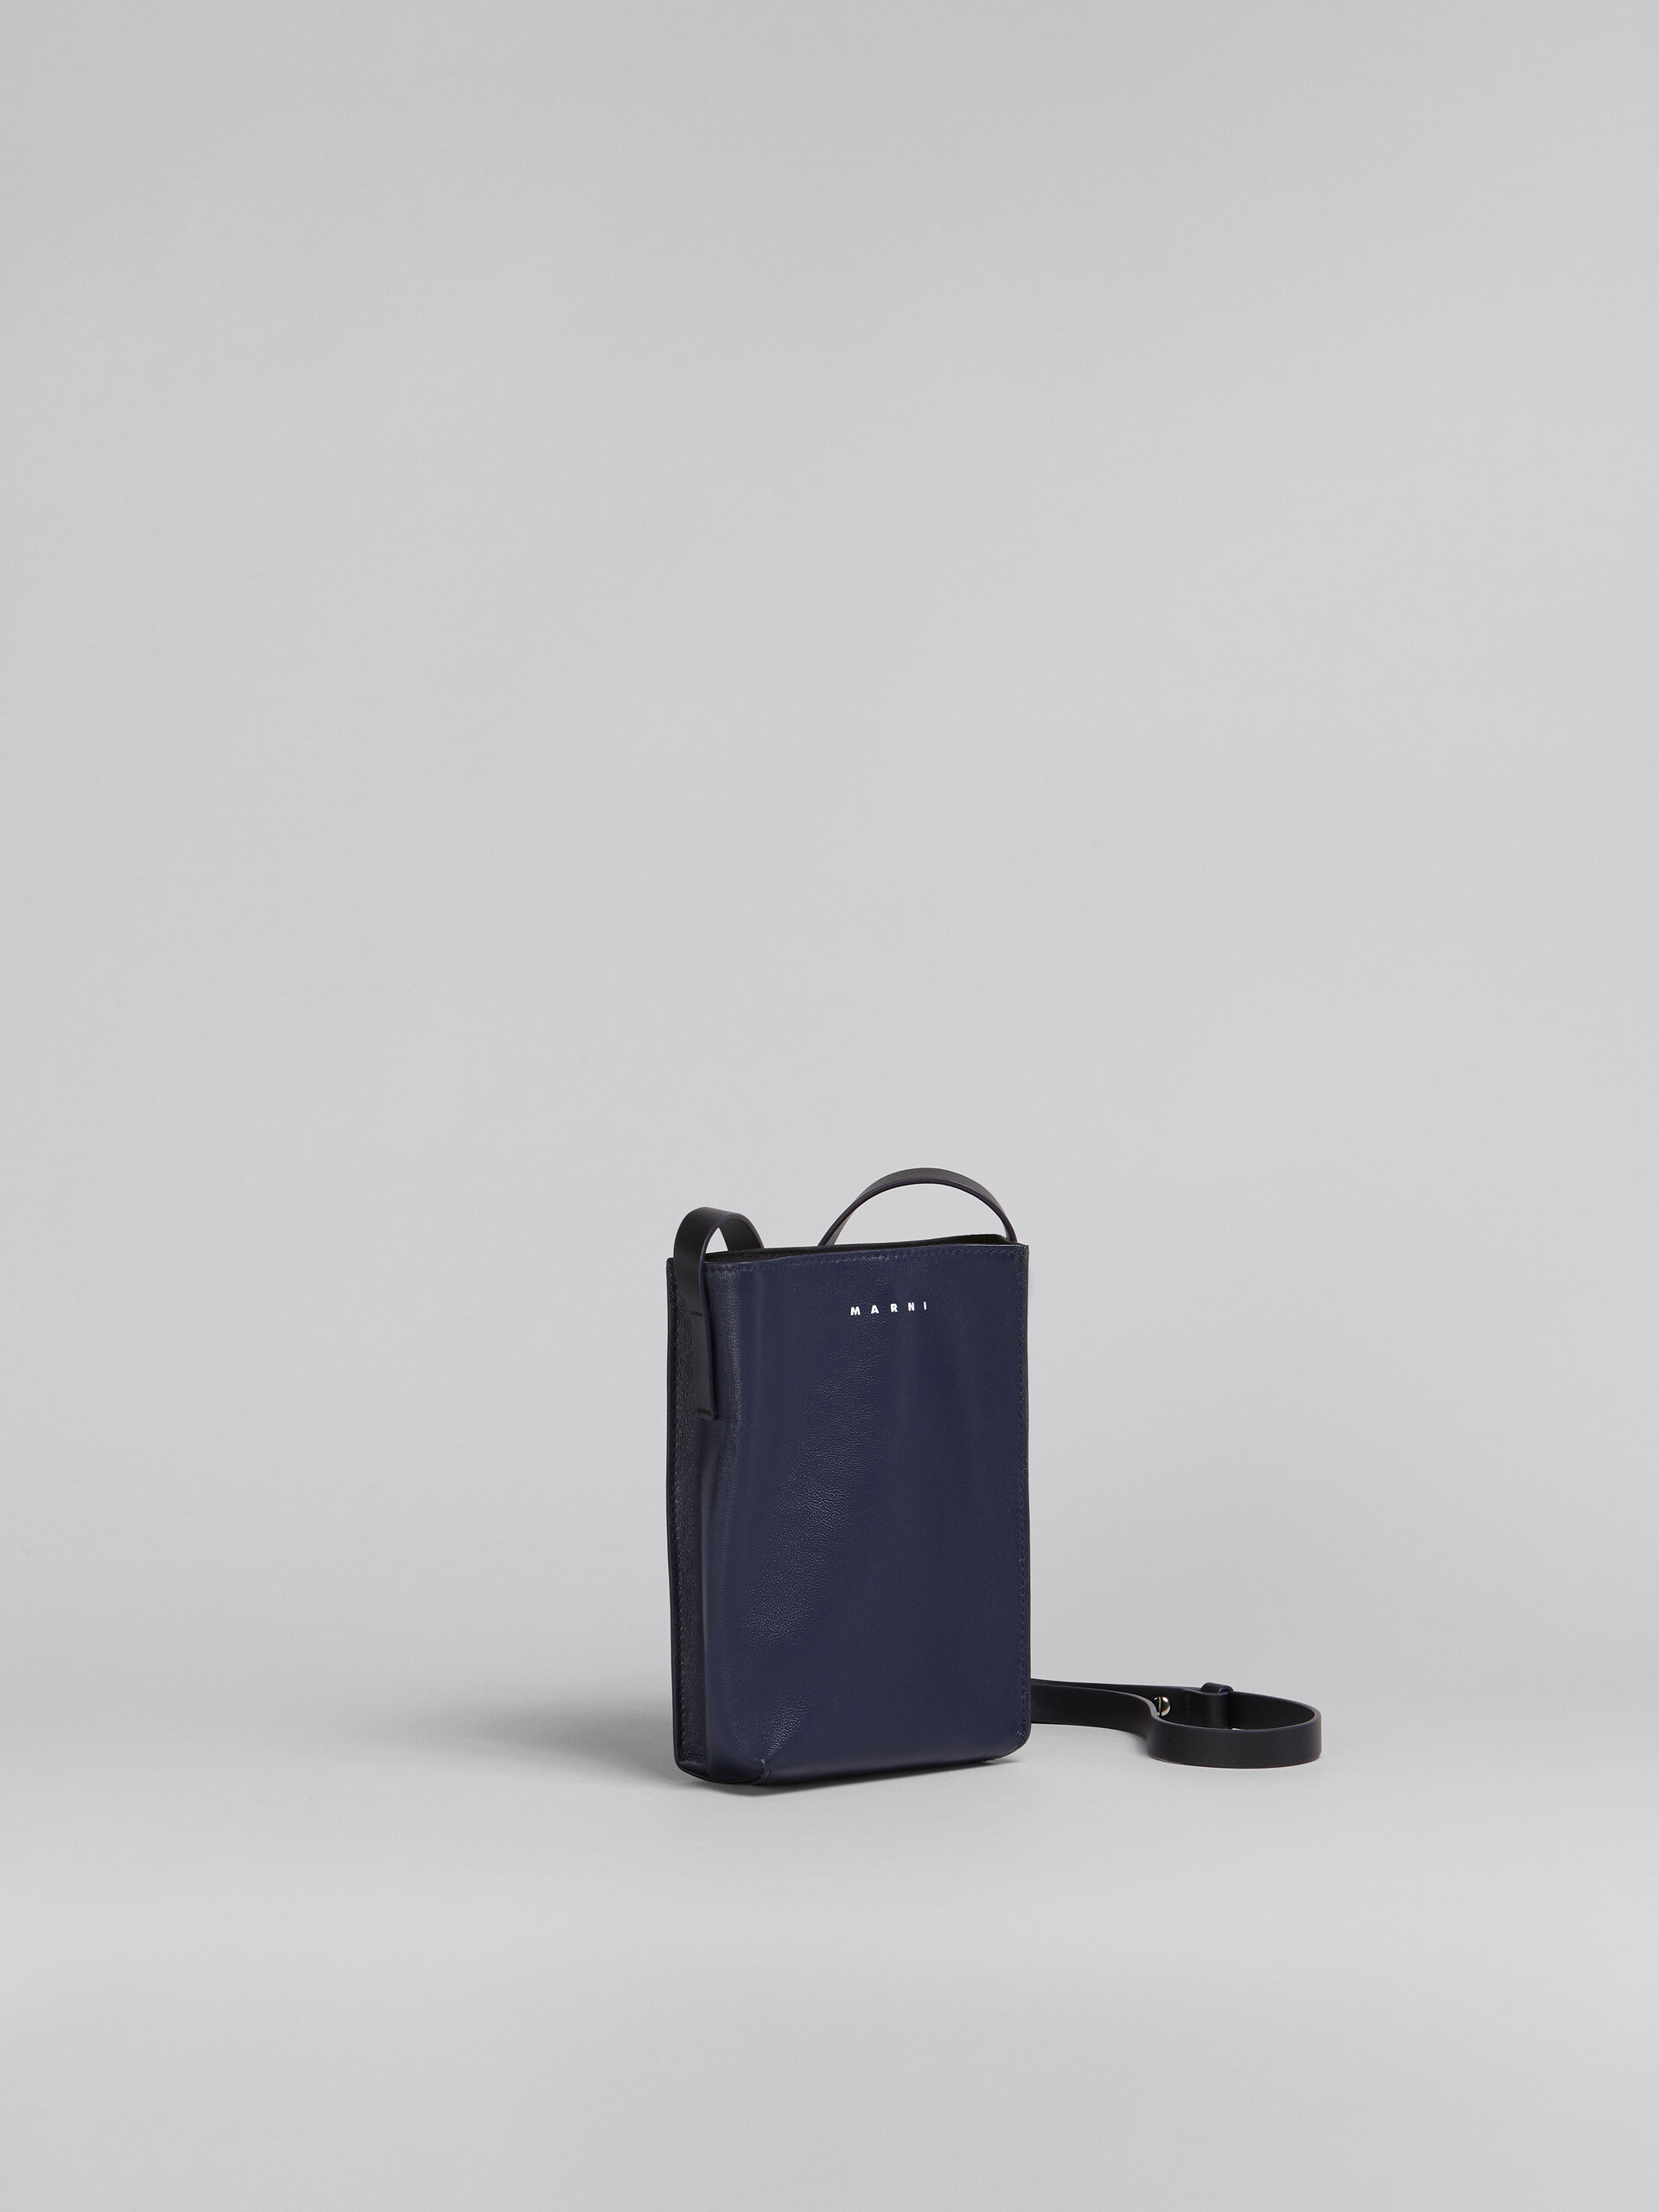 MUSEO SOFT small bag in blue and black shiny leather - Shoulder Bags - Image 6